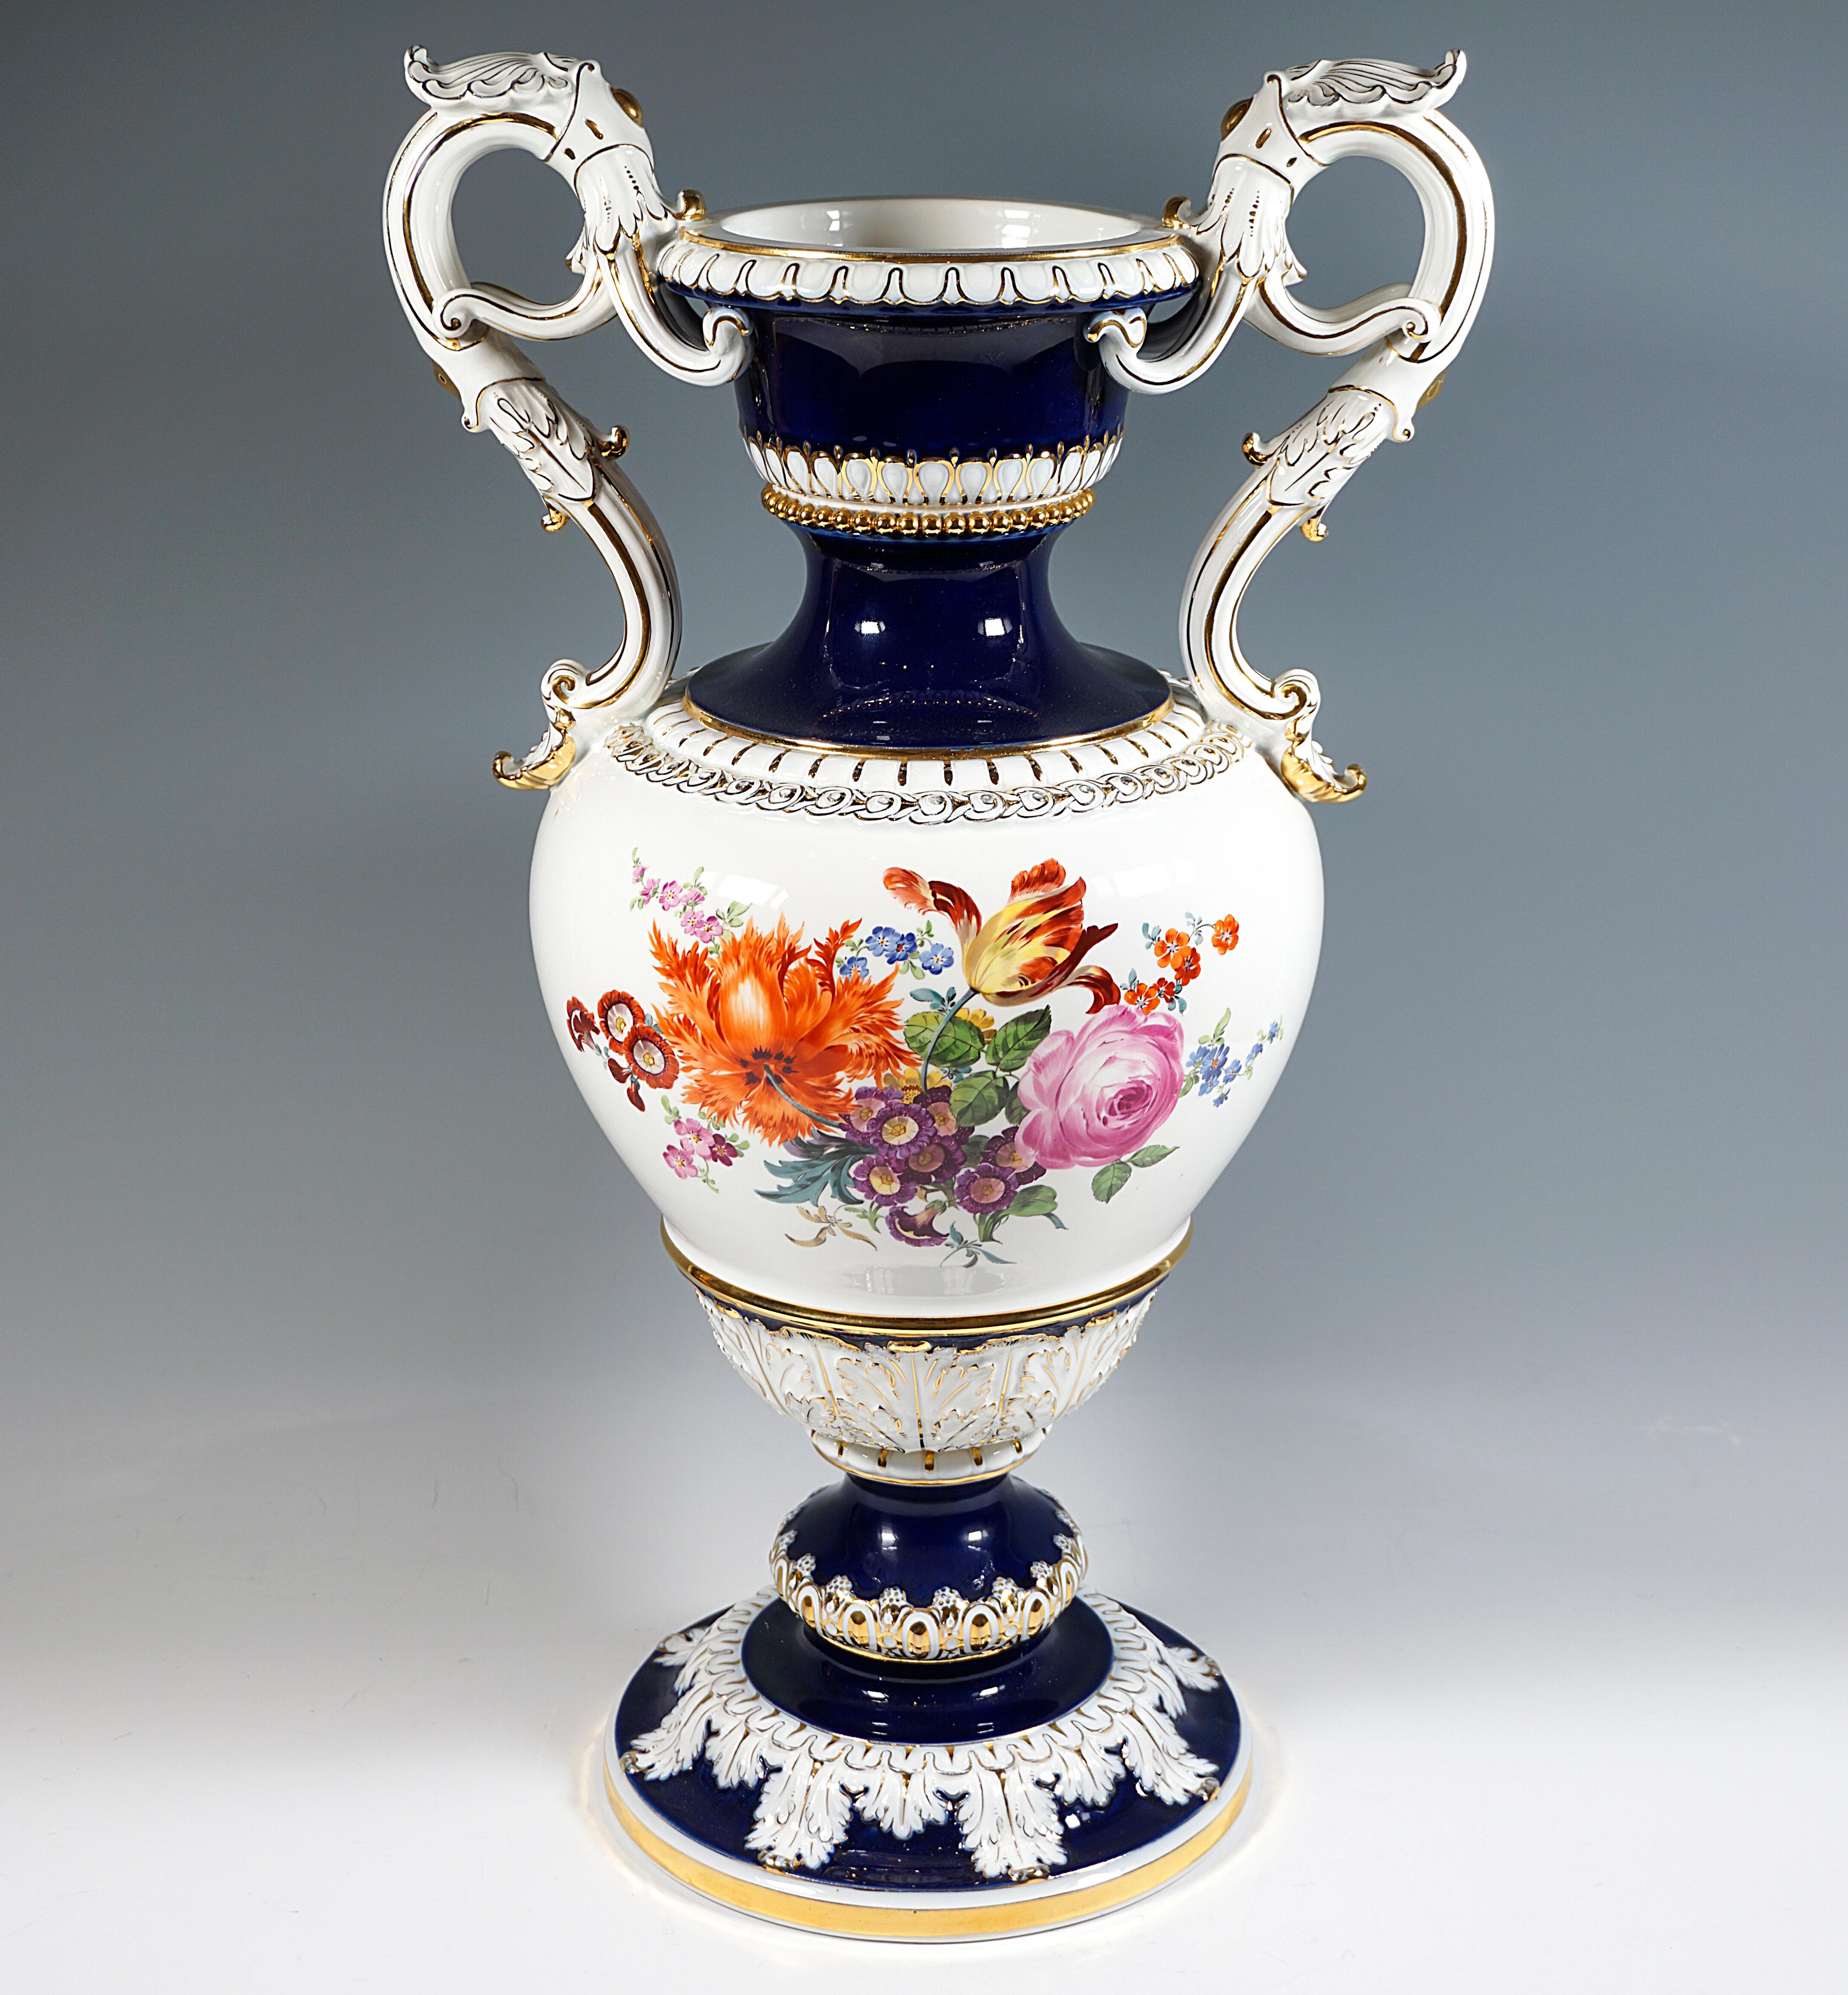 Very large handled vase in baluster form in baroque style on mounted funnel-shaped stand with bead ring in relief, raised handles on the sides in the form of curled acanthus twigs, white background with cobalt blue background painting on the neck